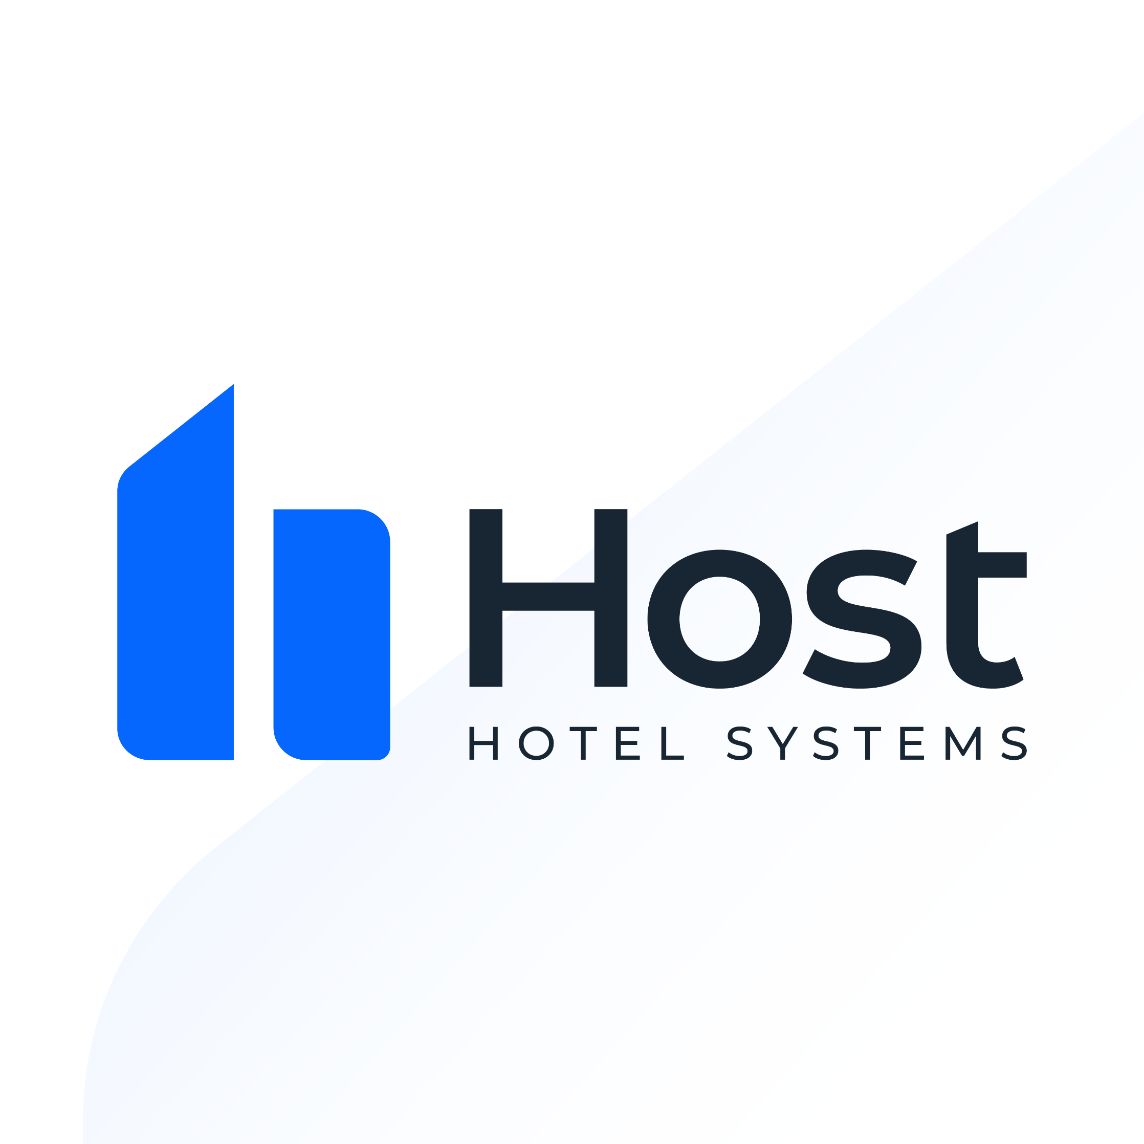 Host Hotel Systems